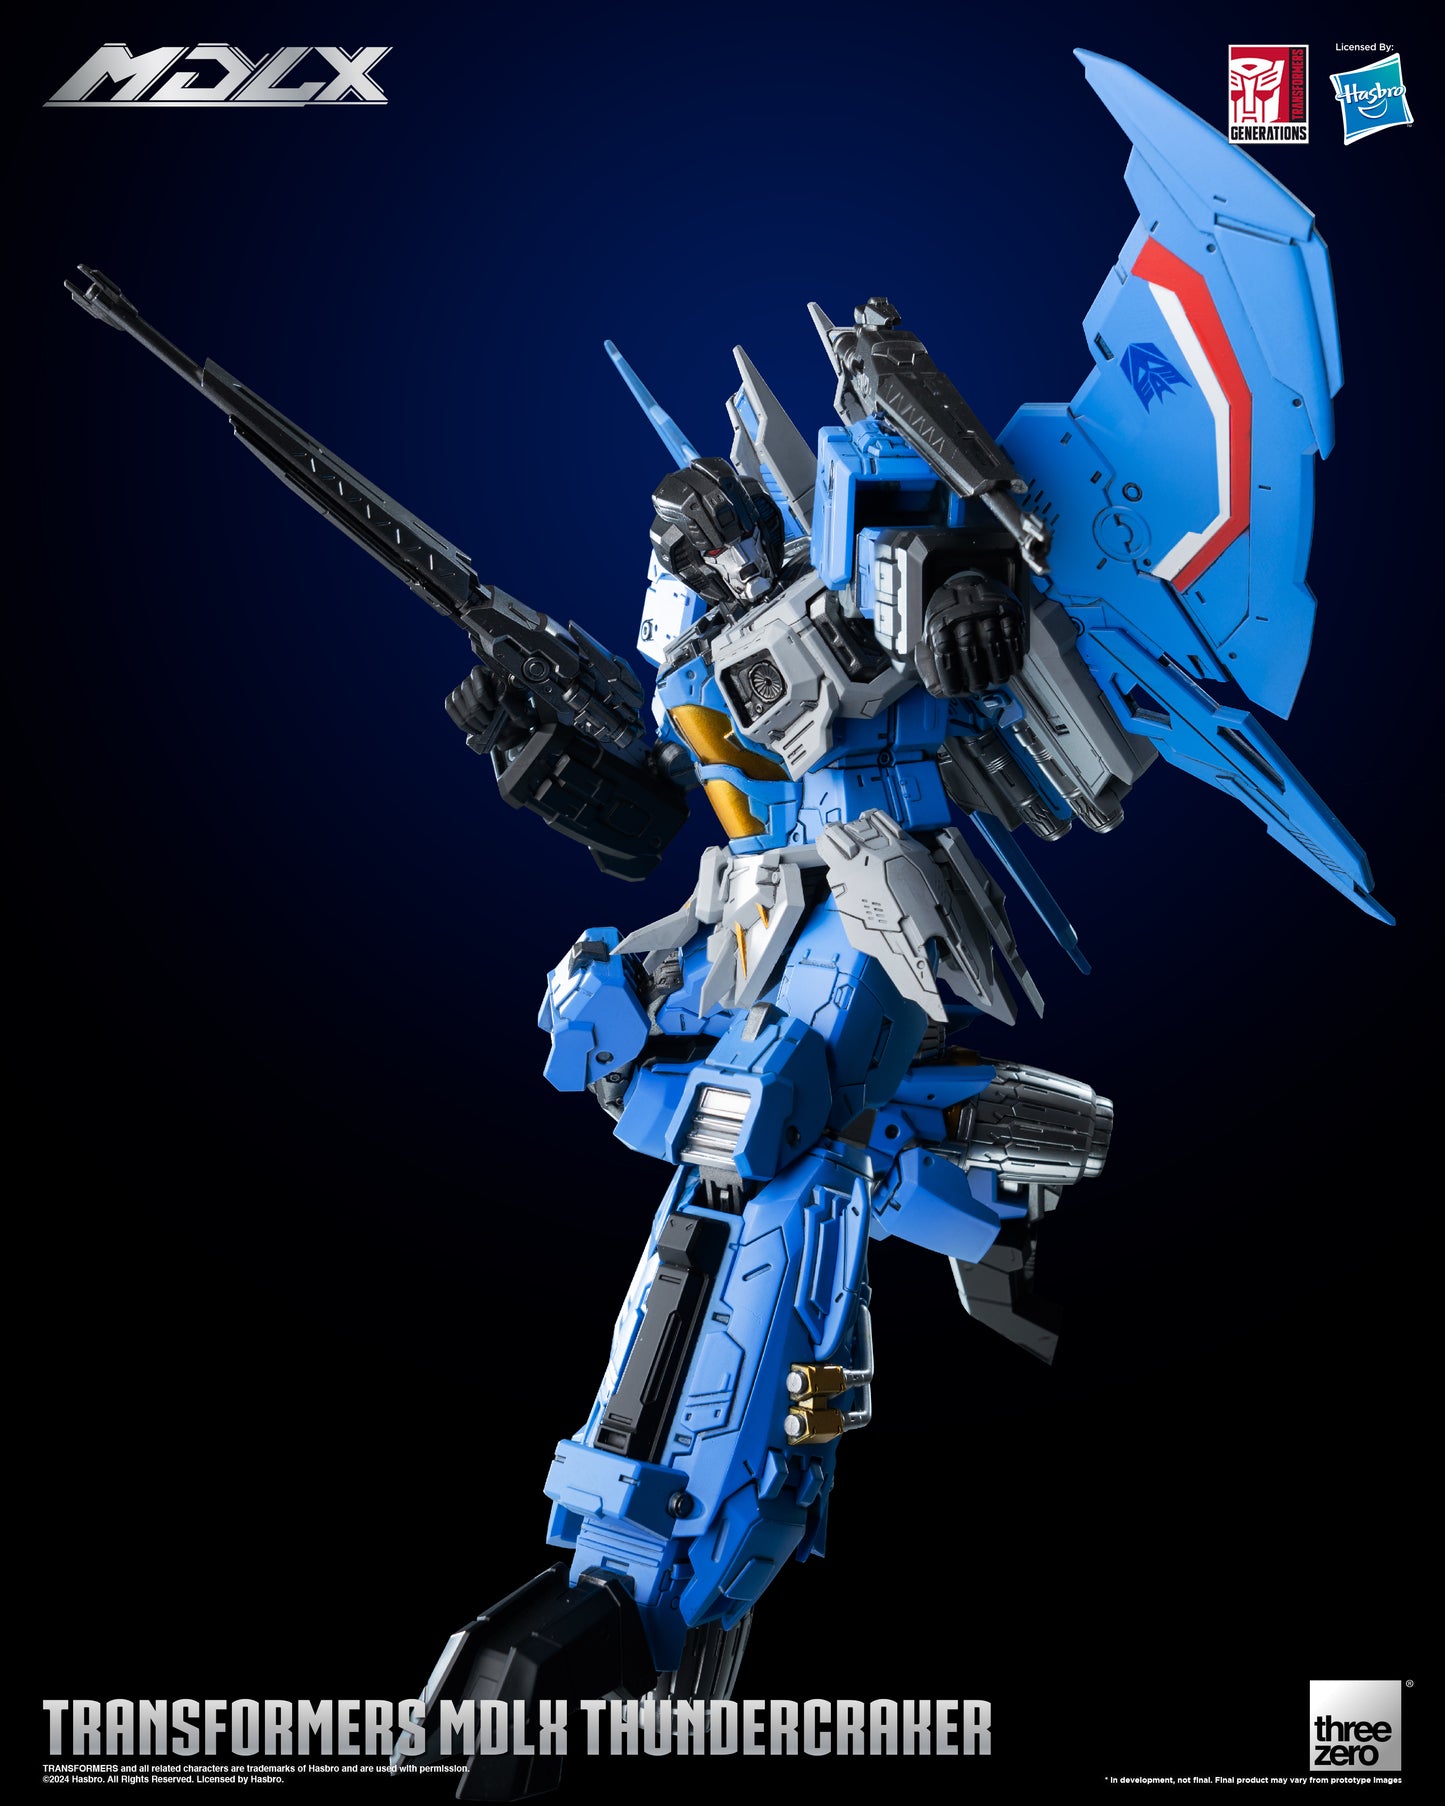 Transformers MDLX Articulated Figure Series Thundercracker left hand gun pointing pose